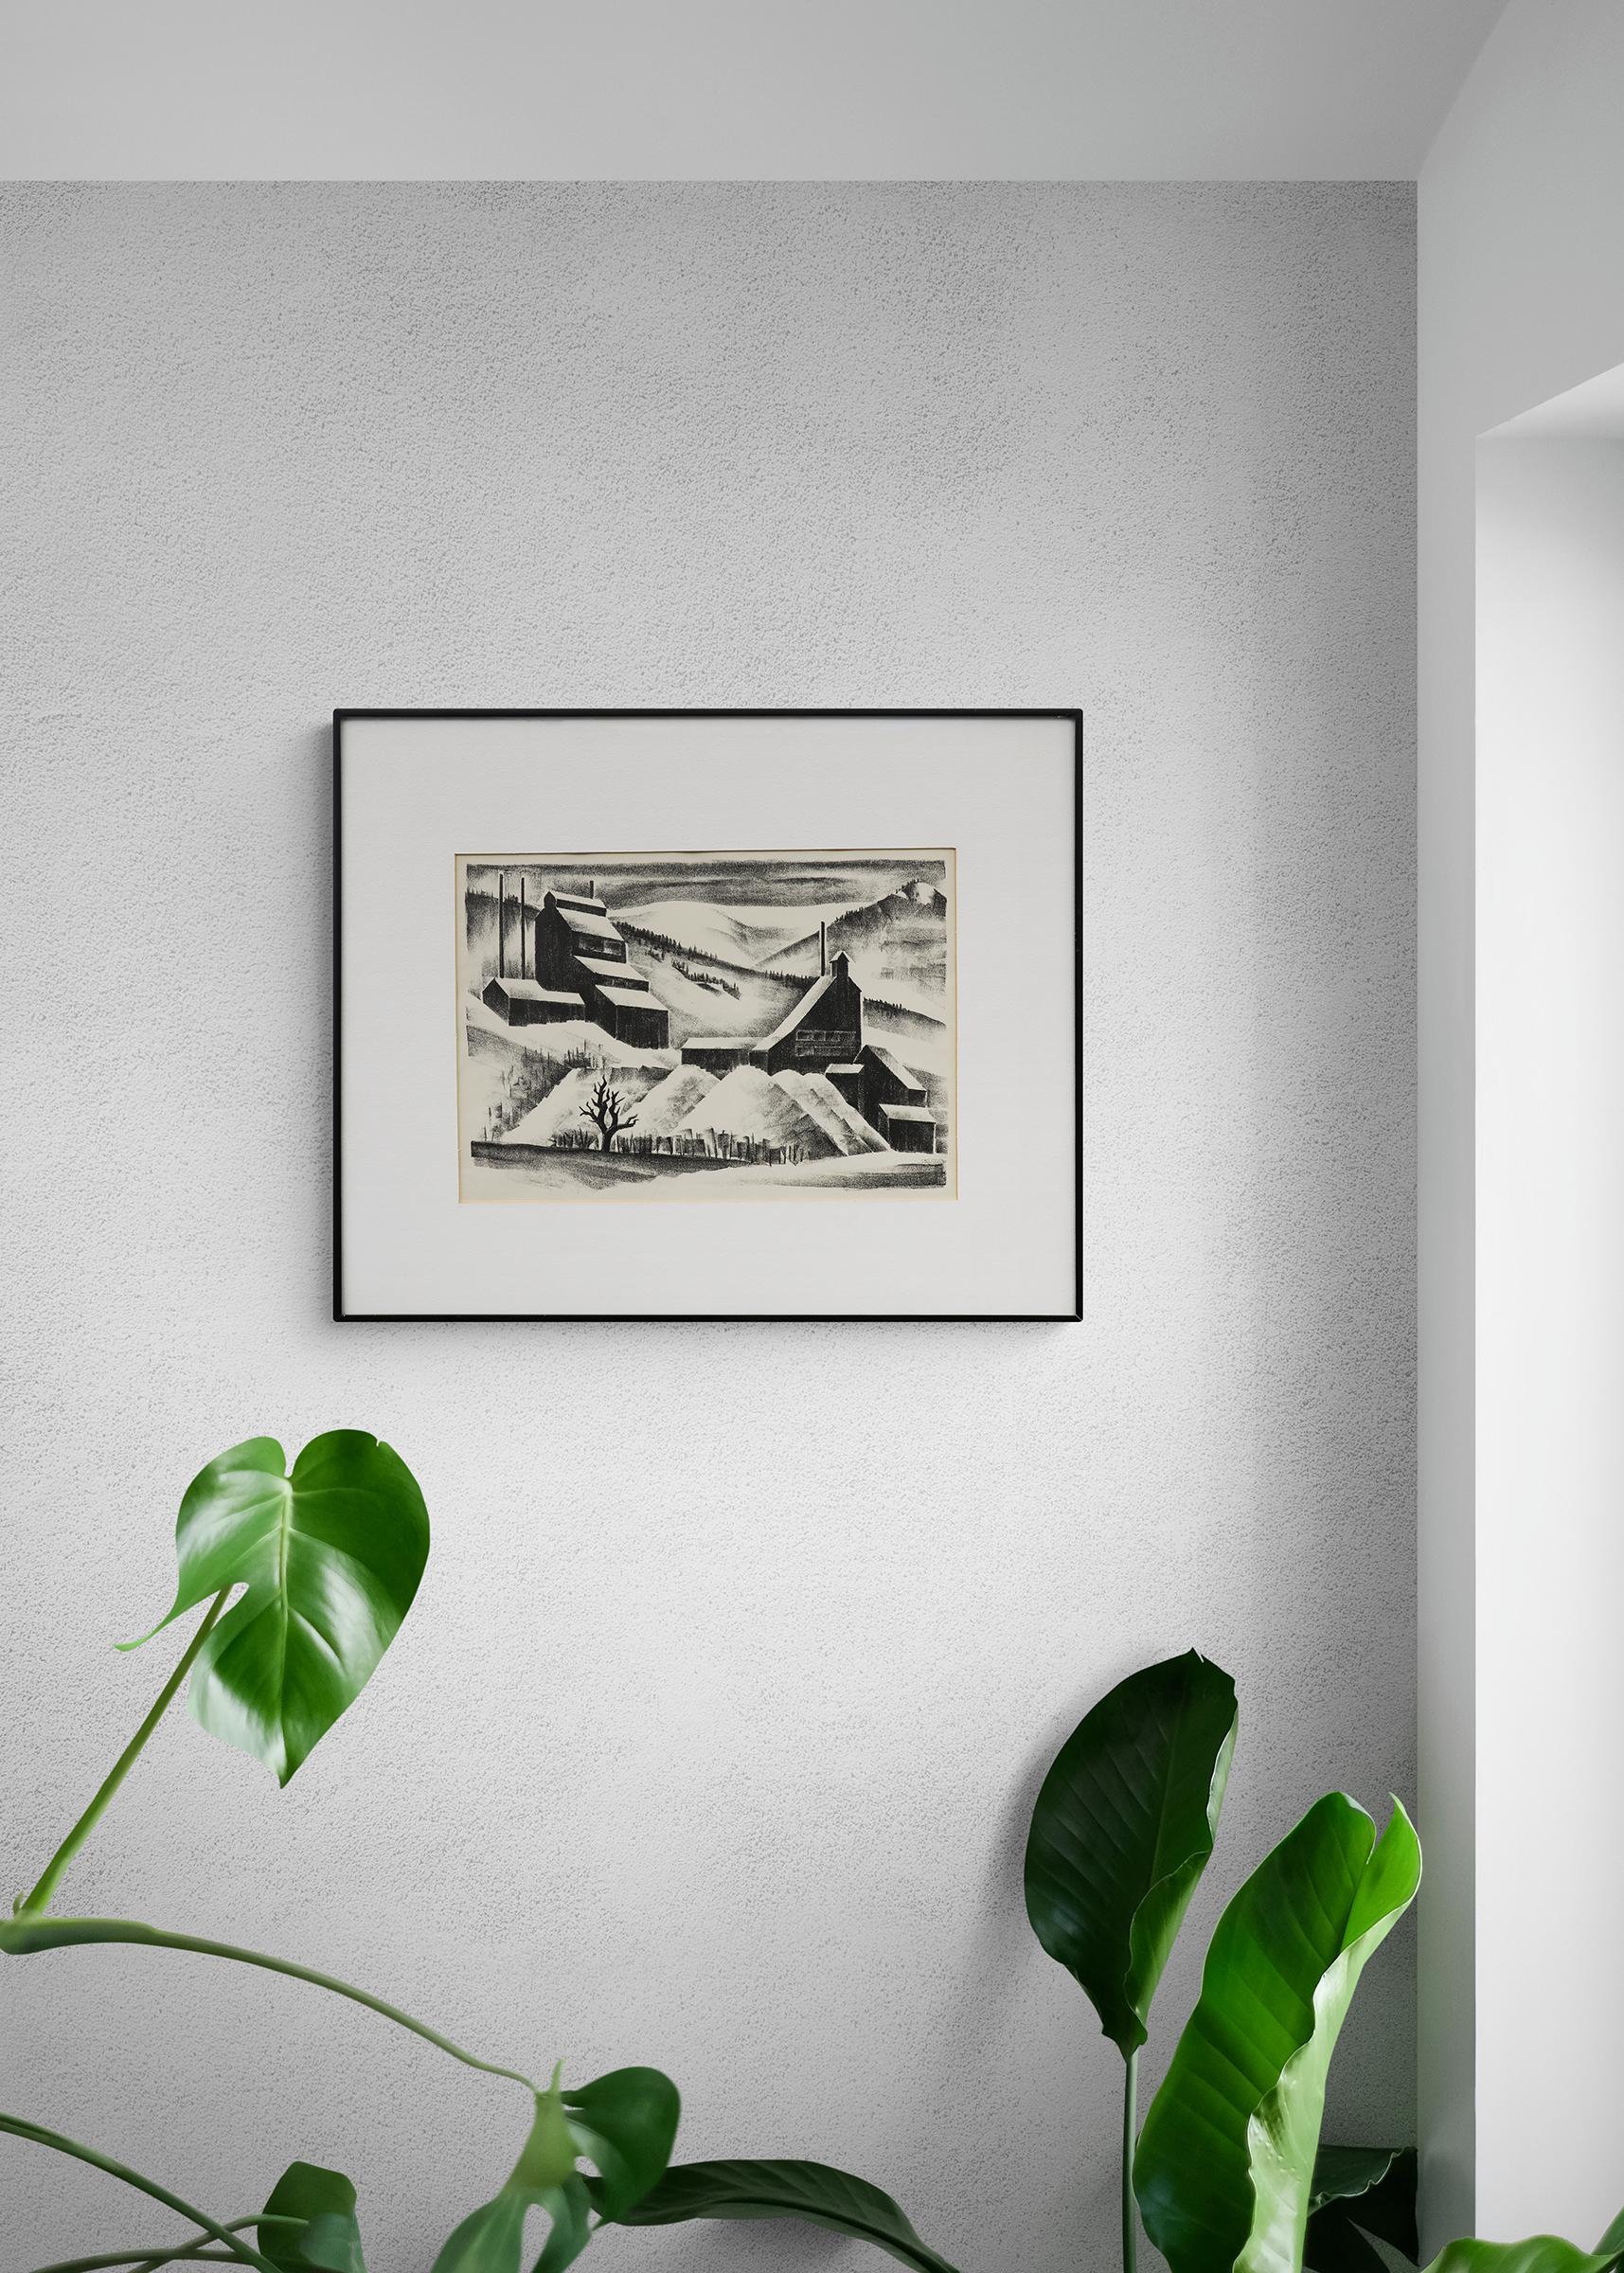 Lithograph on paper titled 'Mine Near Continental Divide' by Arnold Ronnebeck (1885-1947) from 1933. Depicts a black and white winter scene of a mine in the mountains with snow on the rooftops and hillsides. Presented in a custom frame measuring 18